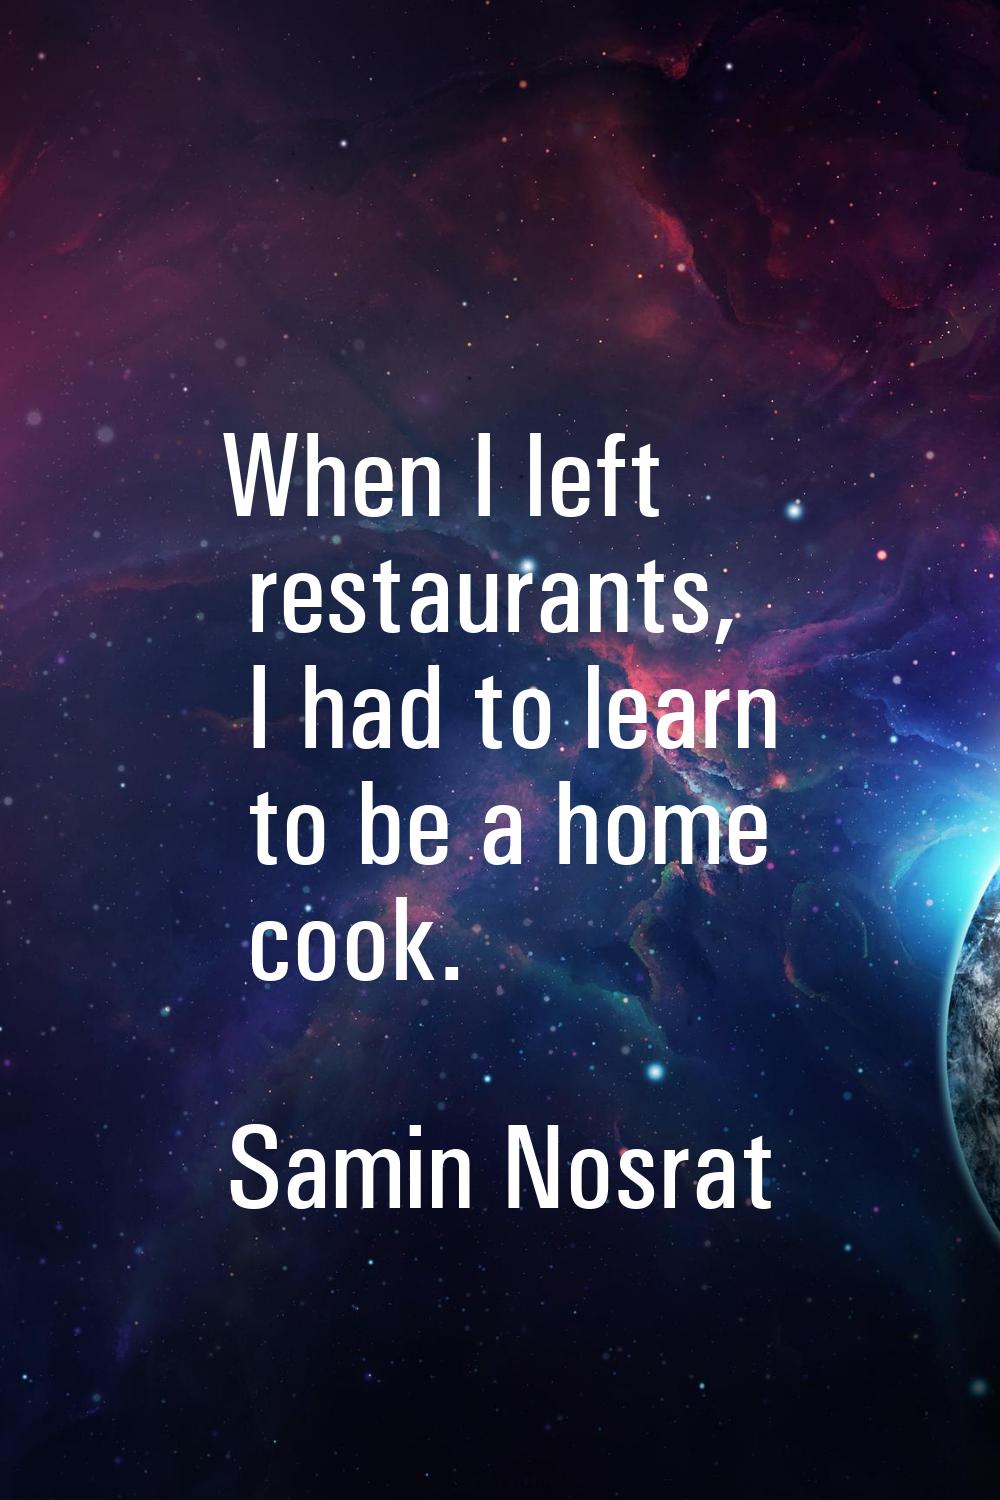 When I left restaurants, I had to learn to be a home cook.